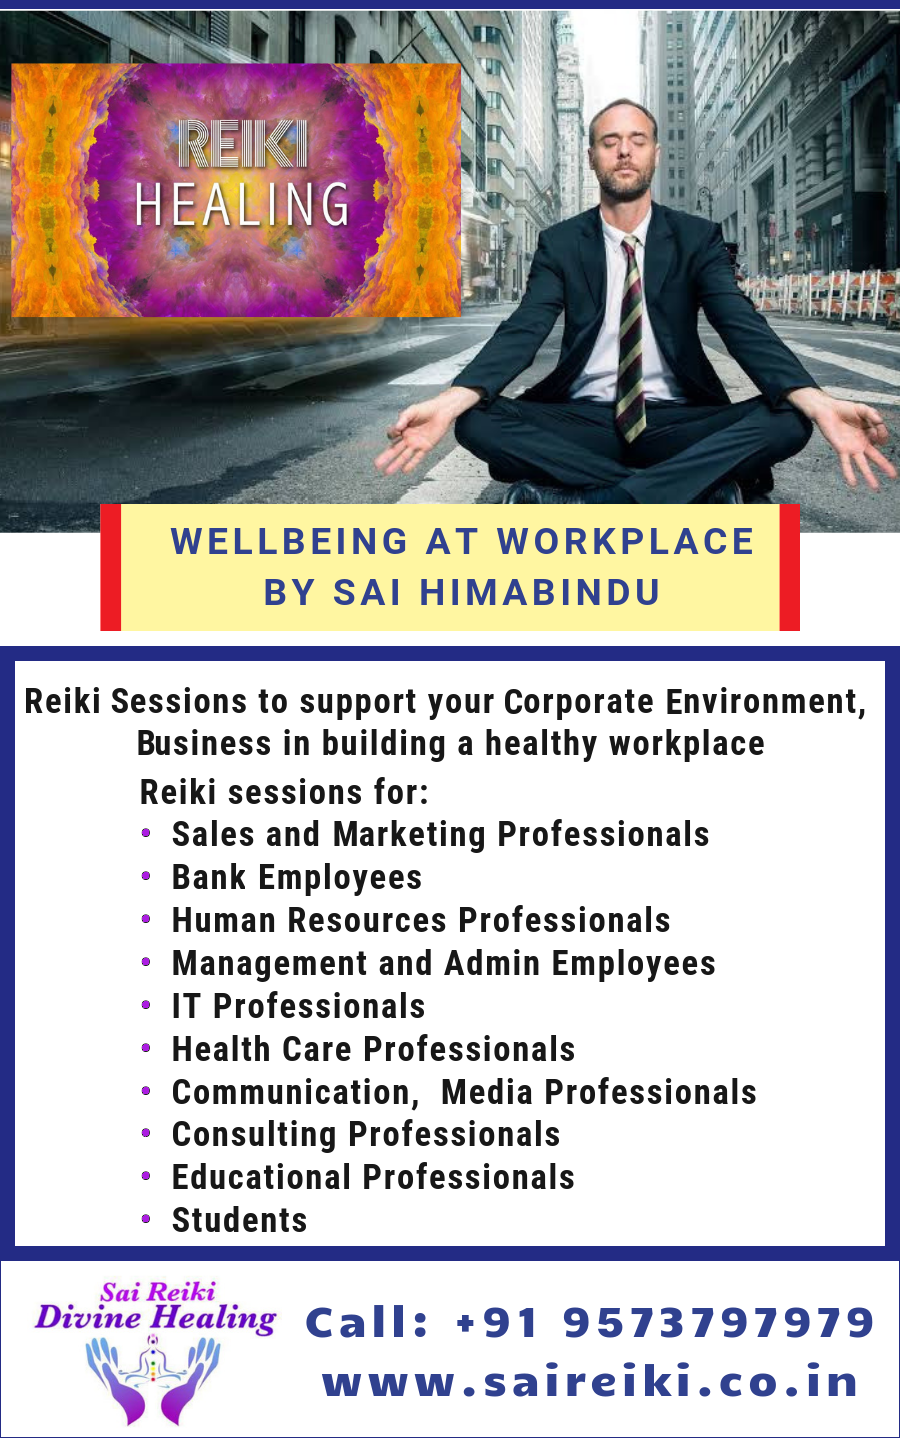 Wellbeing and Stress Management at workplace by Sai Hima Bindu - Visakhapatnam